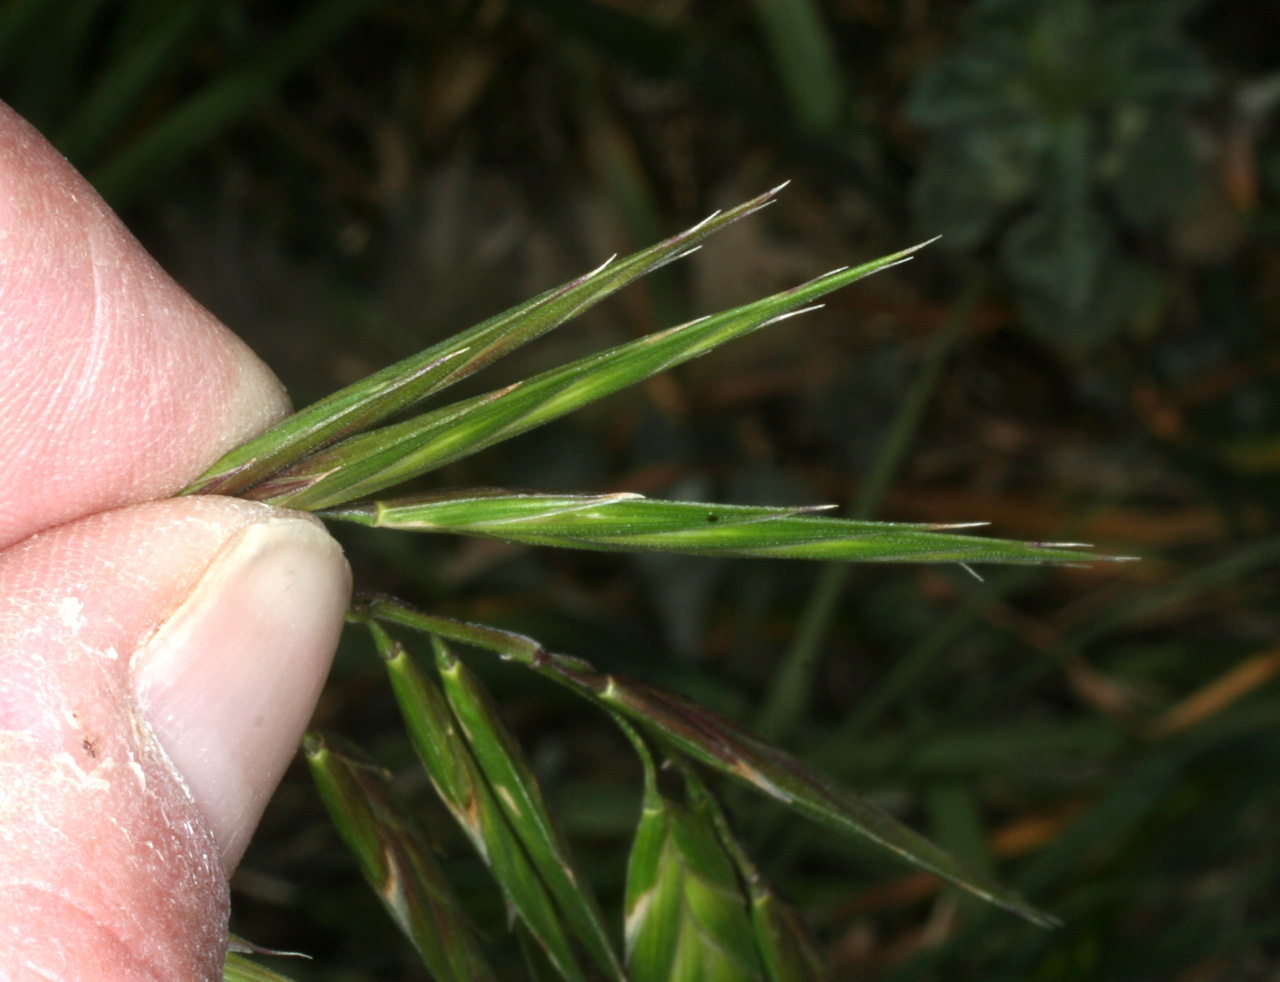 Spikelets are very flat when viewed from the side, a contrast to the frontal view, which is quite wide